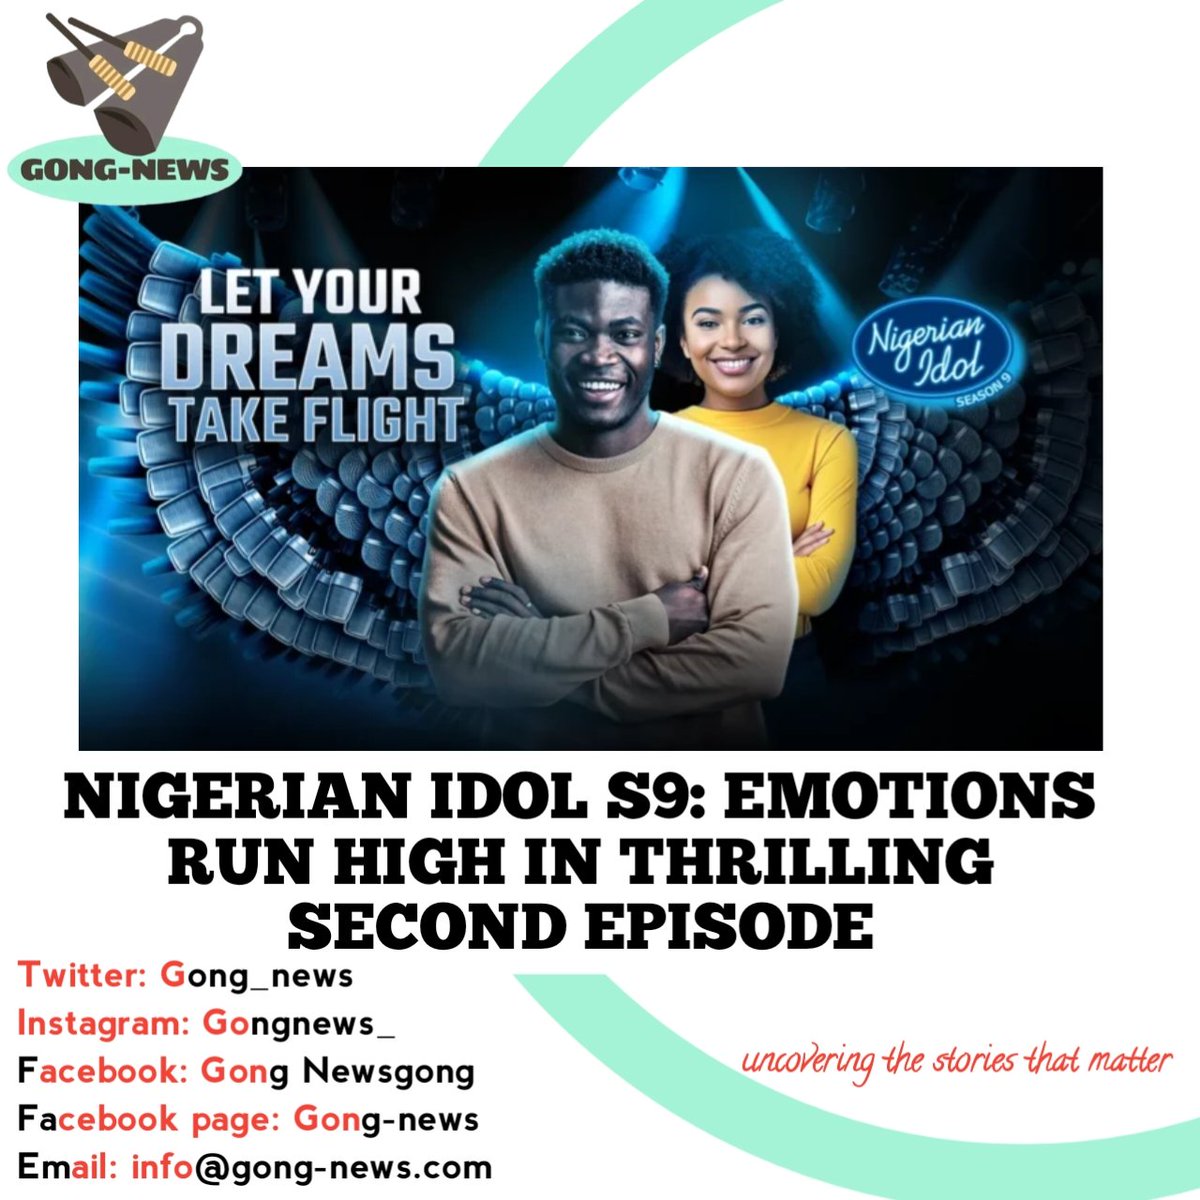 Nigerian Idol, the music talent show has never solely been about showcasing vocal talents but also about sharing the touching stories behind each performance
#Gong Newsgong #Gong-news #info@gong-news.com #trending #NewsUpdate  #newspaper #LatestNews  #LatestUpdates #NewsInNigeria